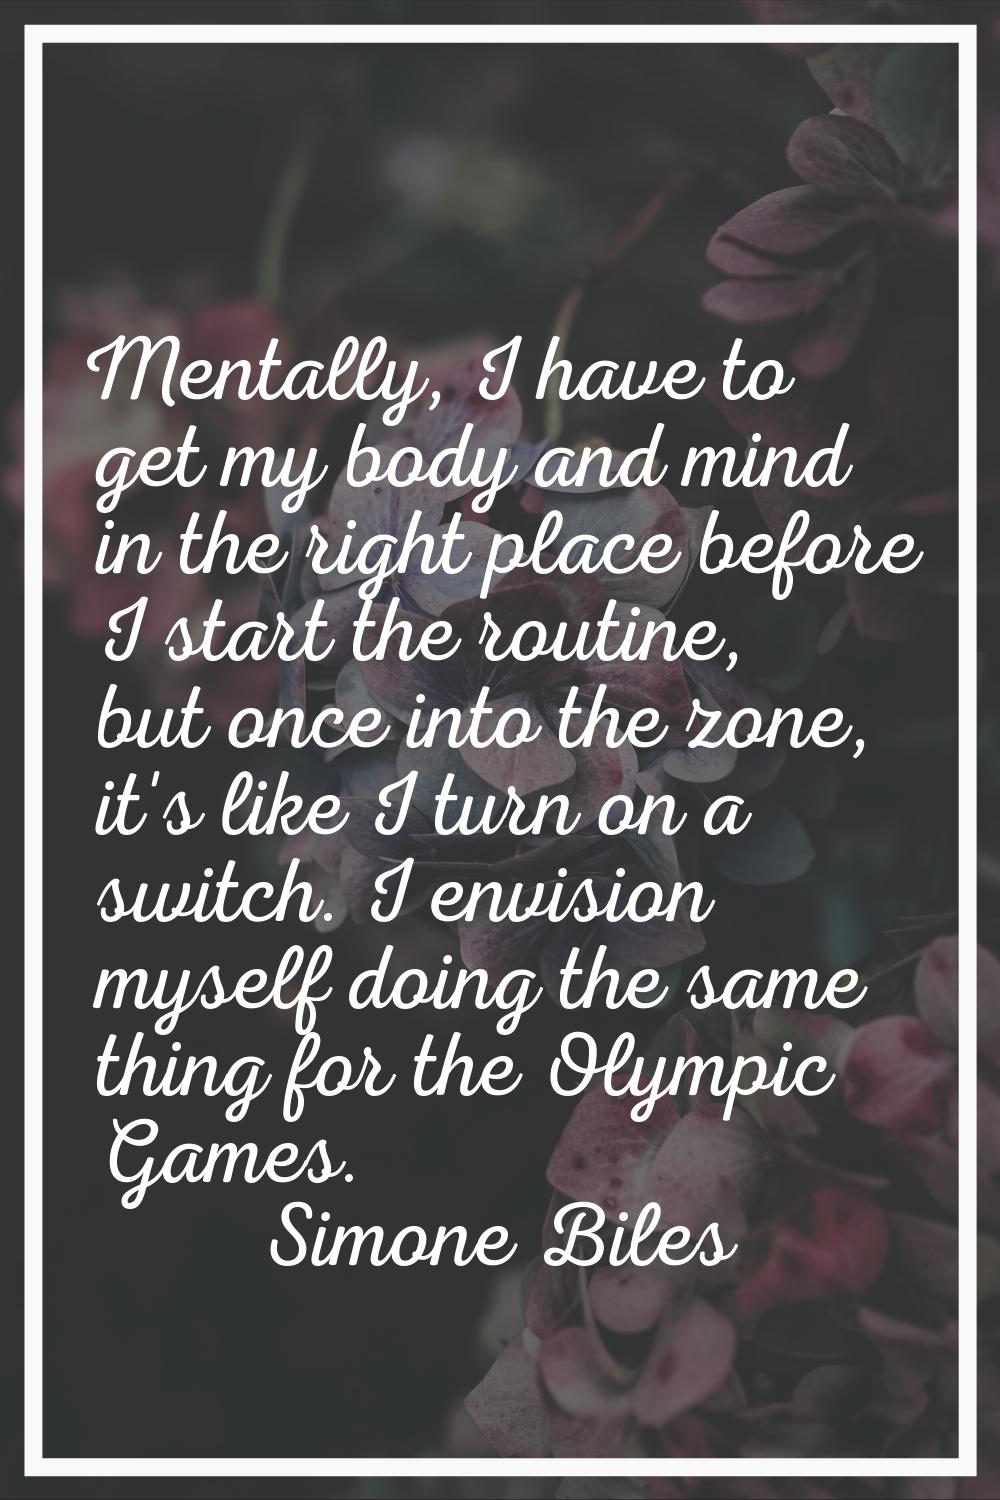 Mentally, I have to get my body and mind in the right place before I start the routine, but once in